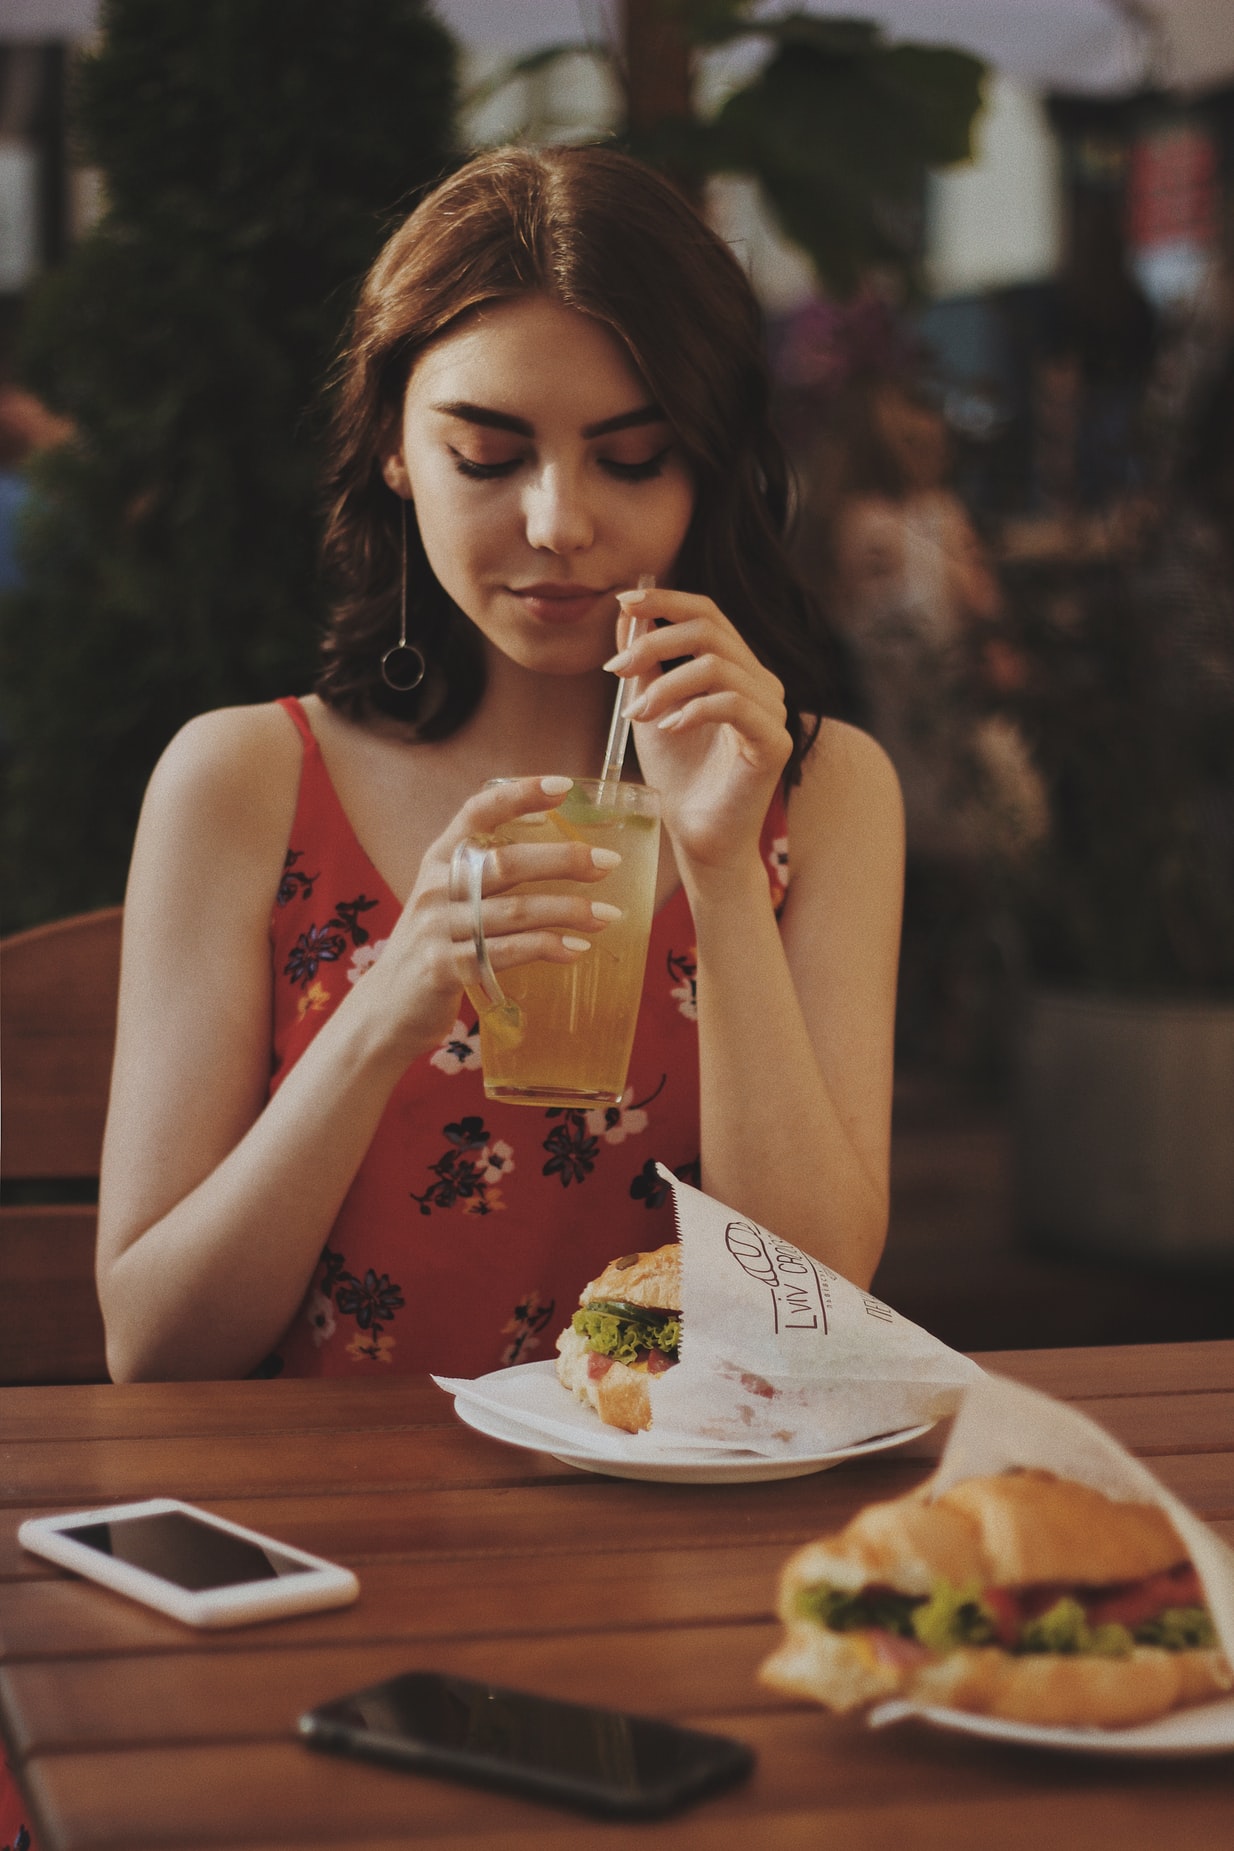 A women eating her meal and drinking cold-drink in a resturant